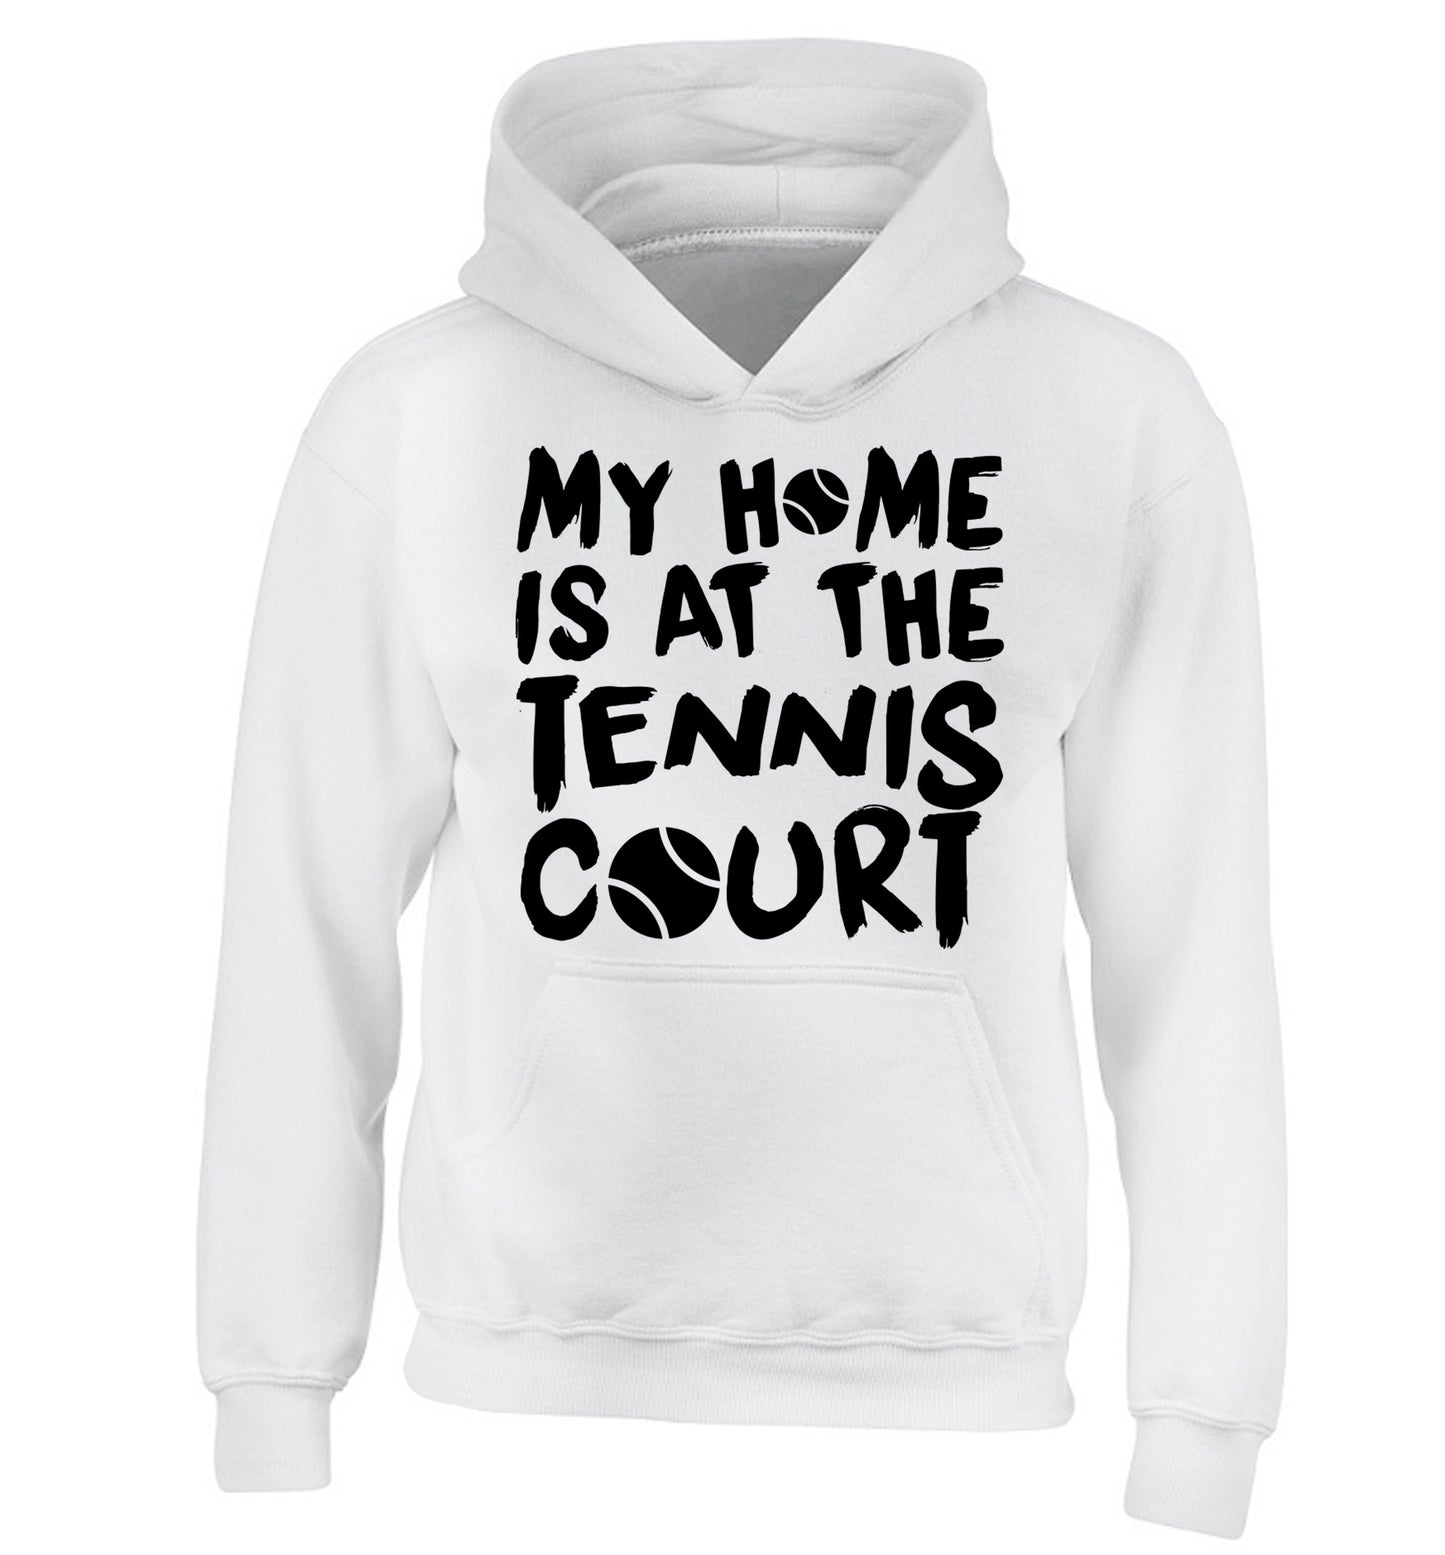 My home is at the tennis court children's white hoodie 12-14 Years